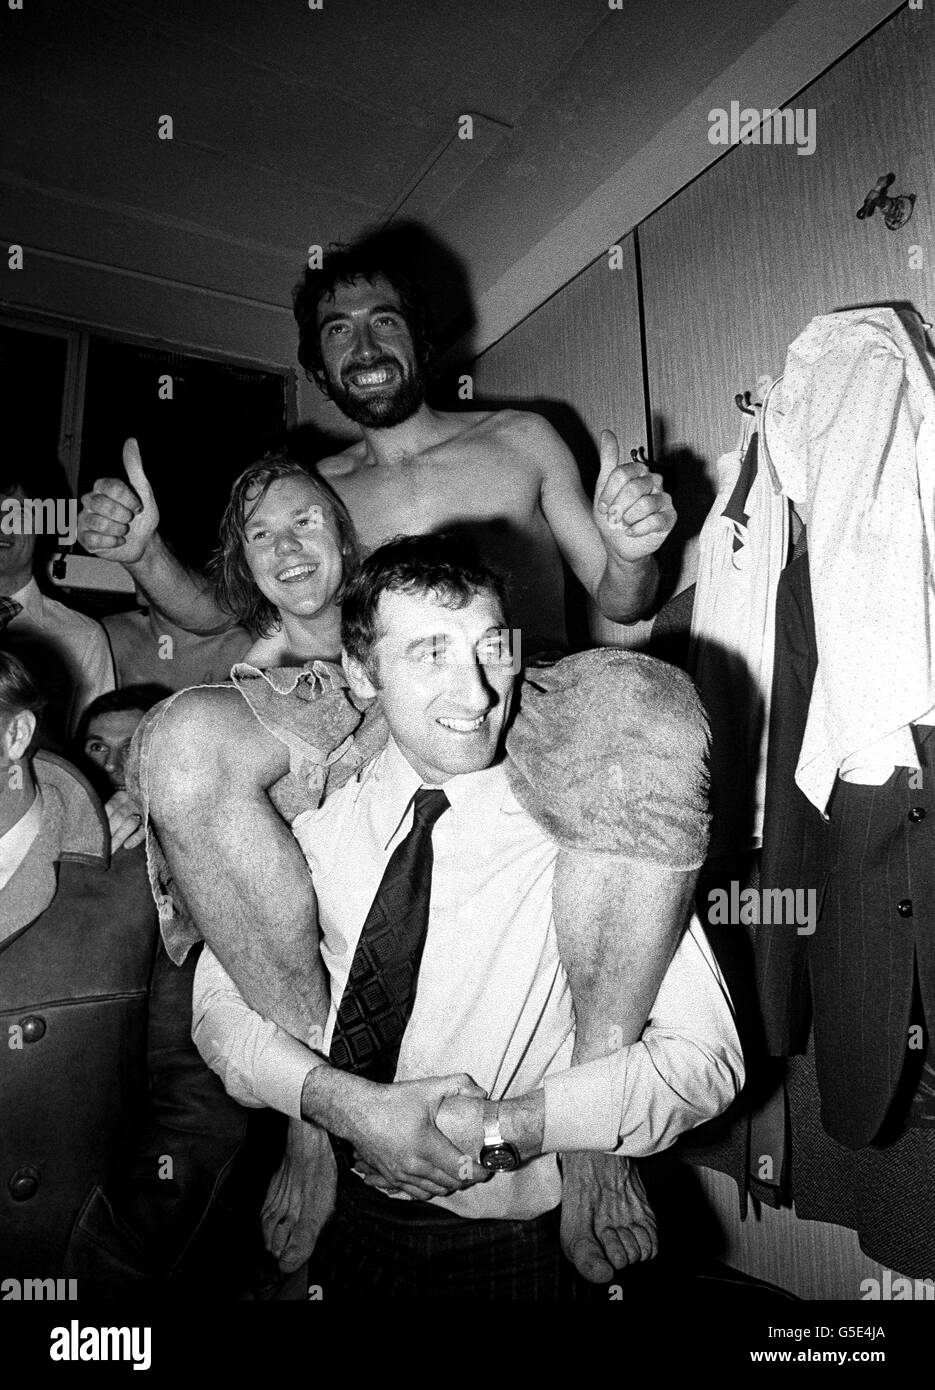 In the dressing room at Leeds United's Elland Road ground after yesterday's Nil-Nil match, bearded Wimbledon hero Dickie Guy on the back of their coach Brian Hall Stock Photo